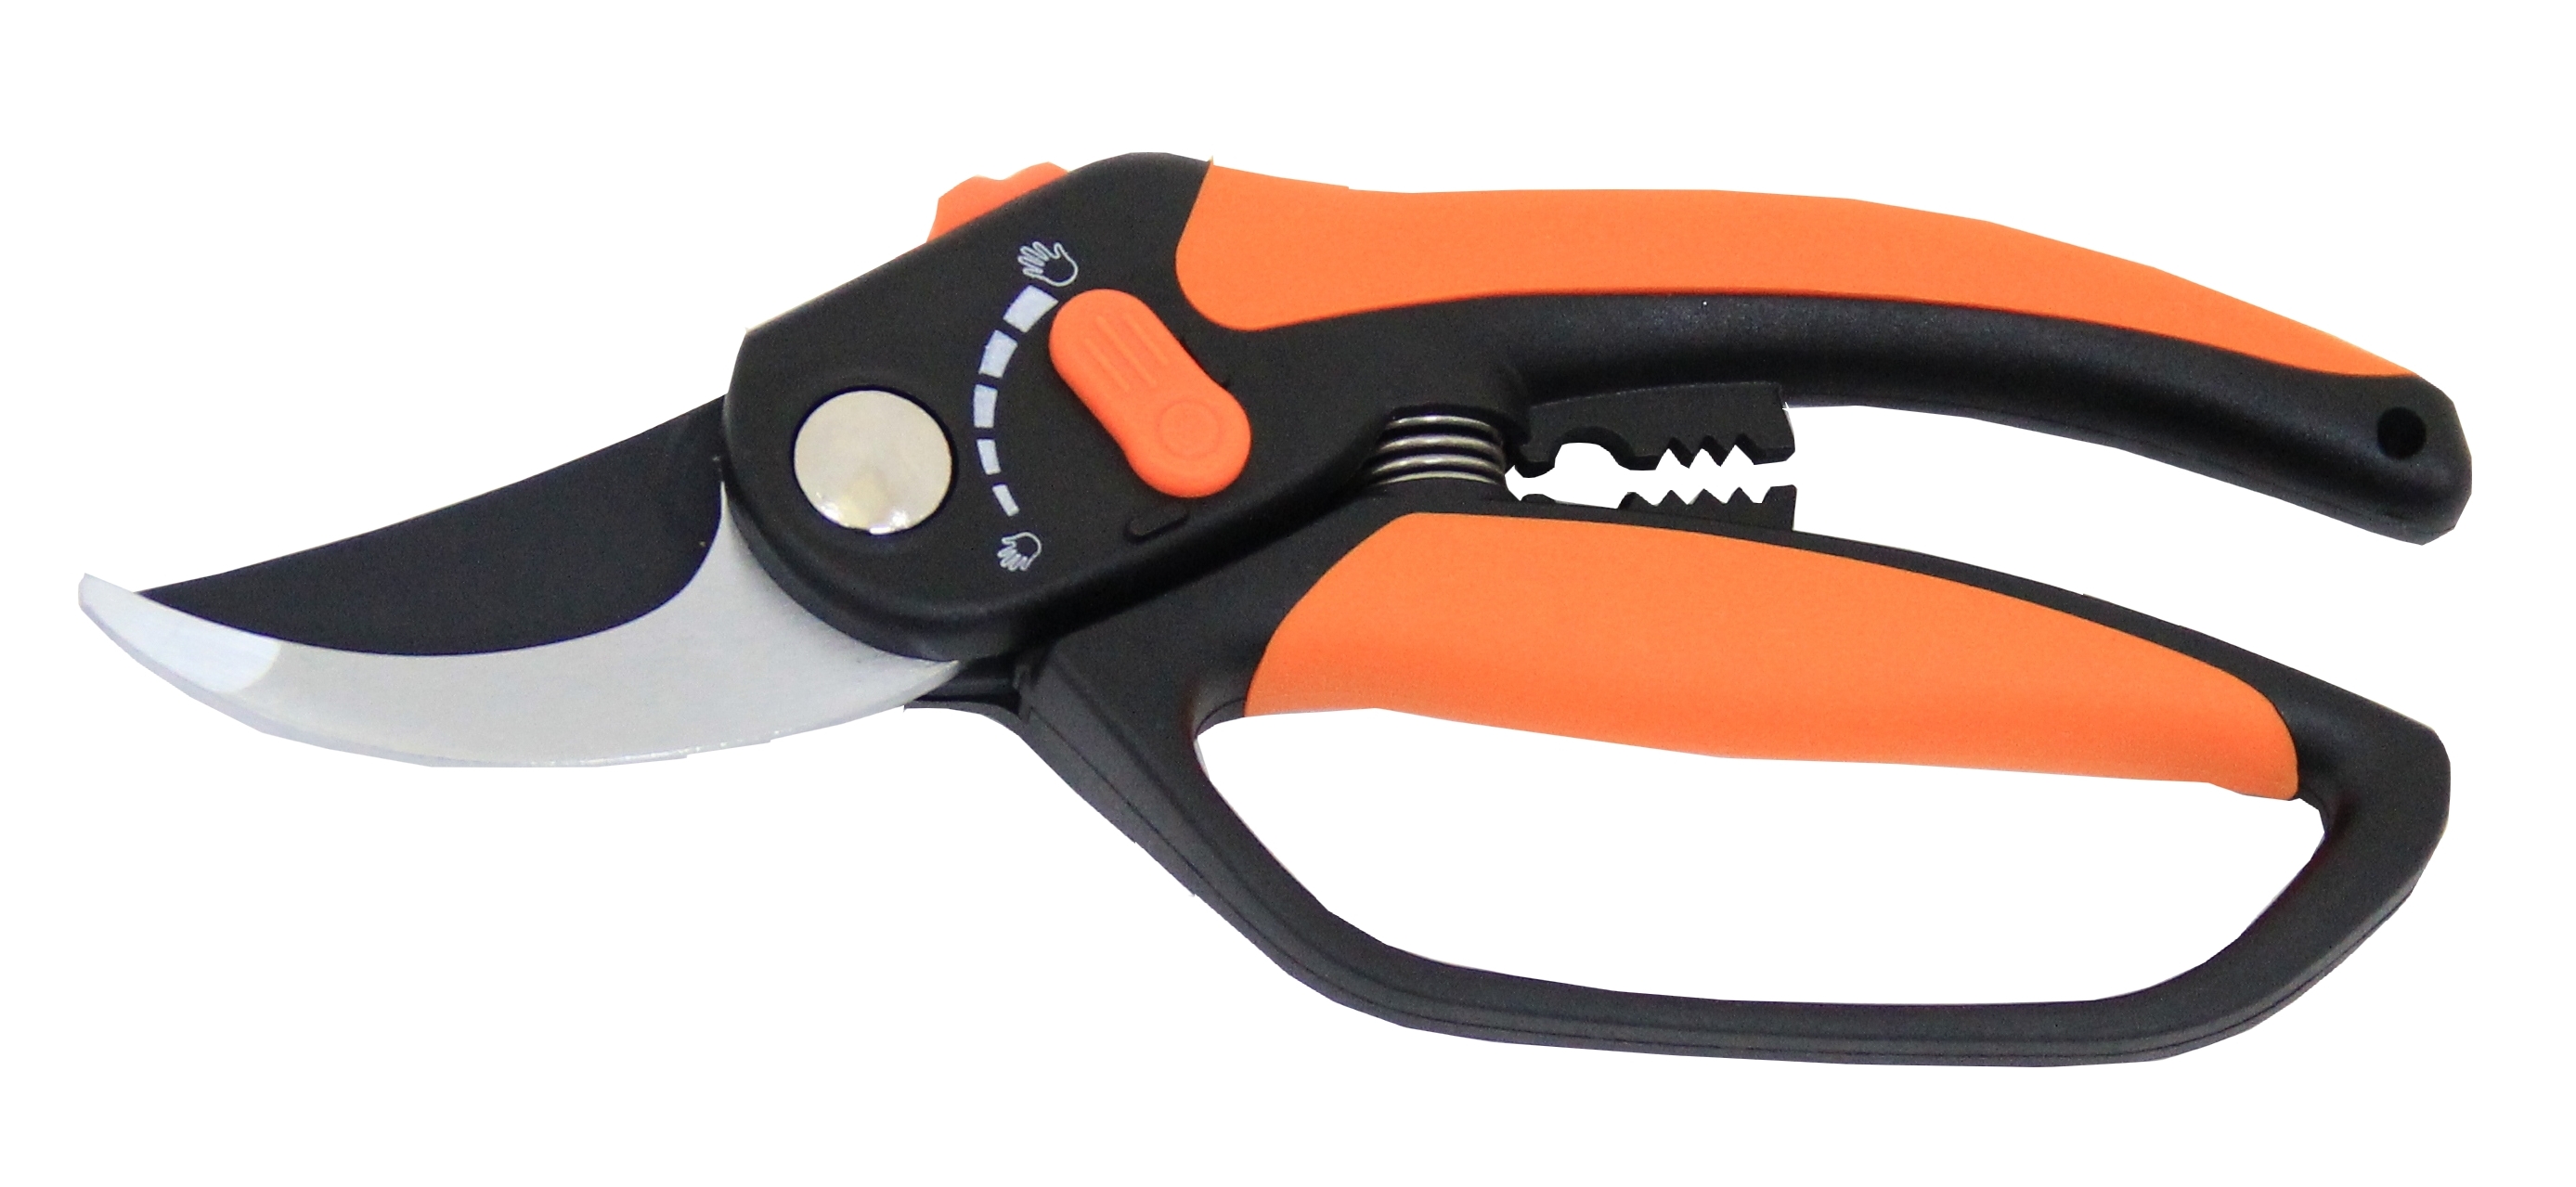 7.5” Bypass Pruner with Finger  Loop